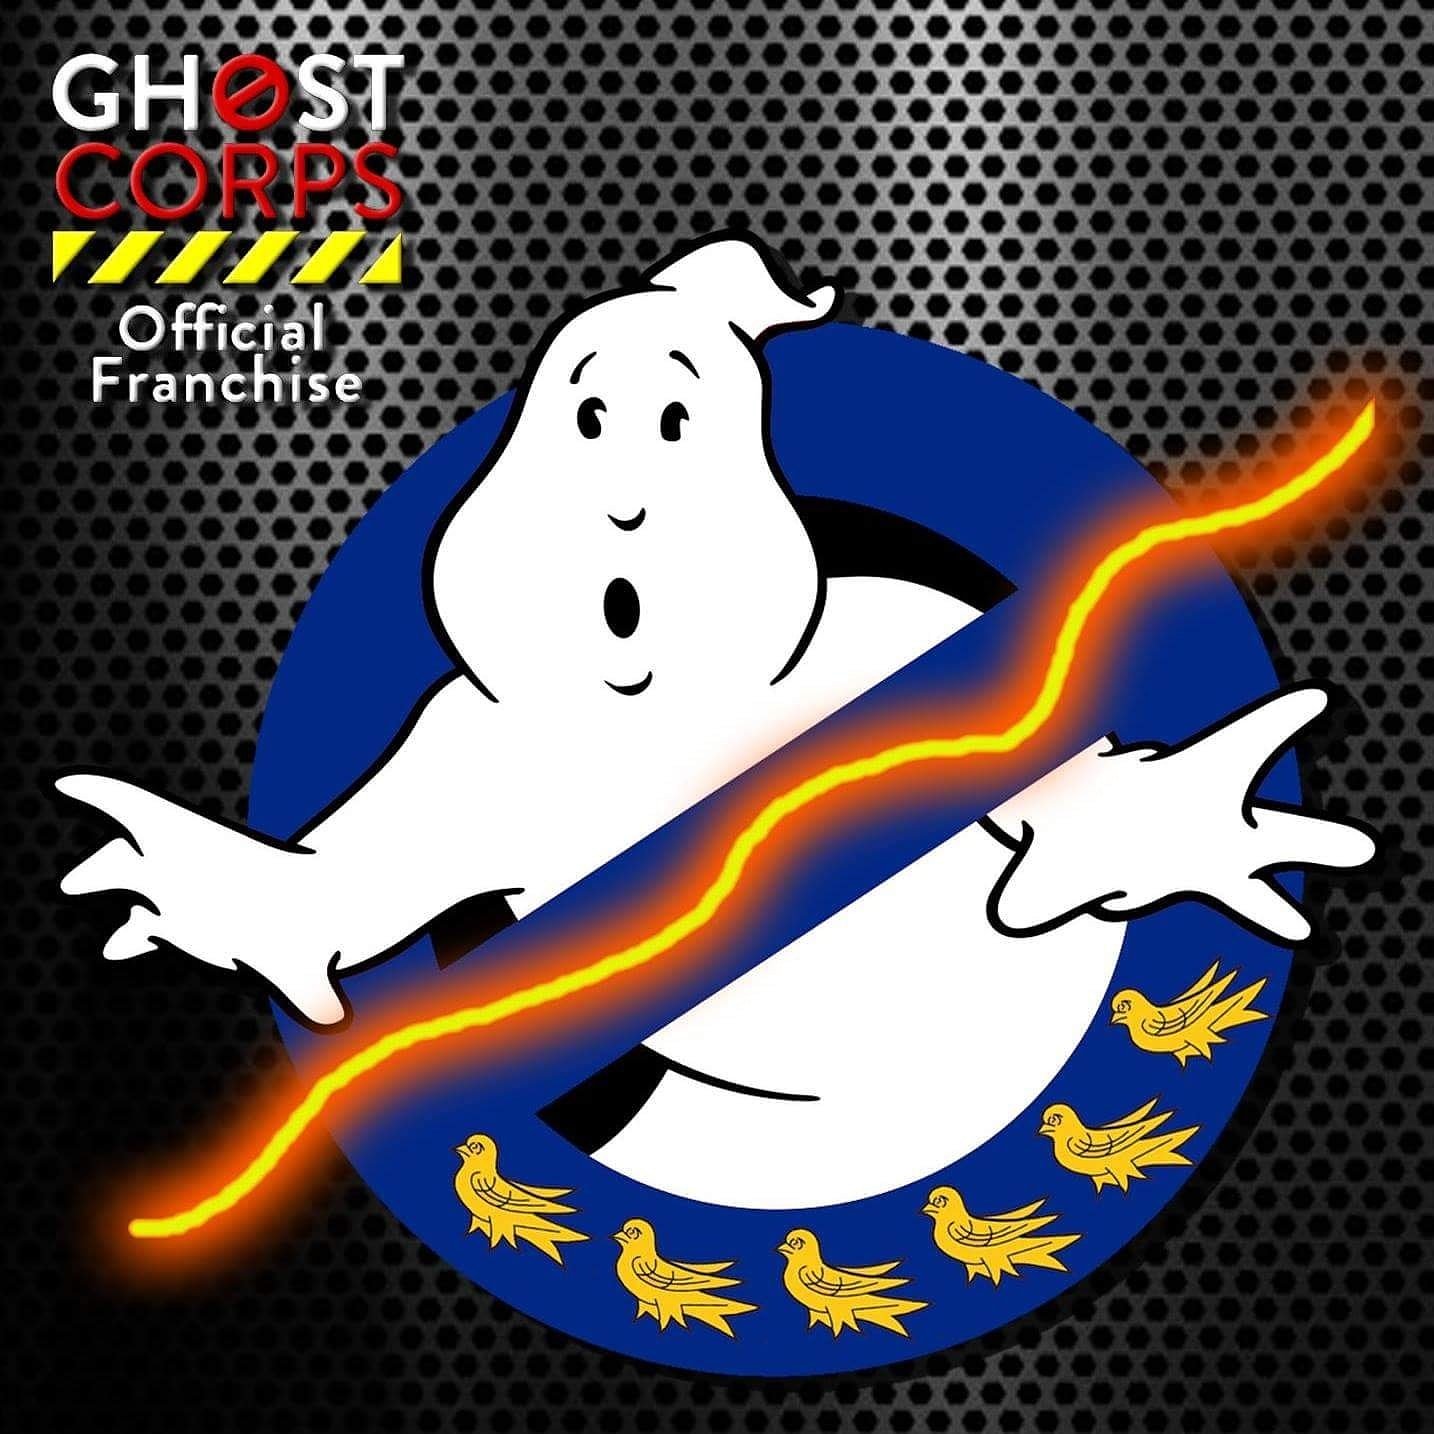 Tag us with #SussexGB!  Your local official Ghostbusters franchise raising money, smiles and spirits across the county of Sussex!